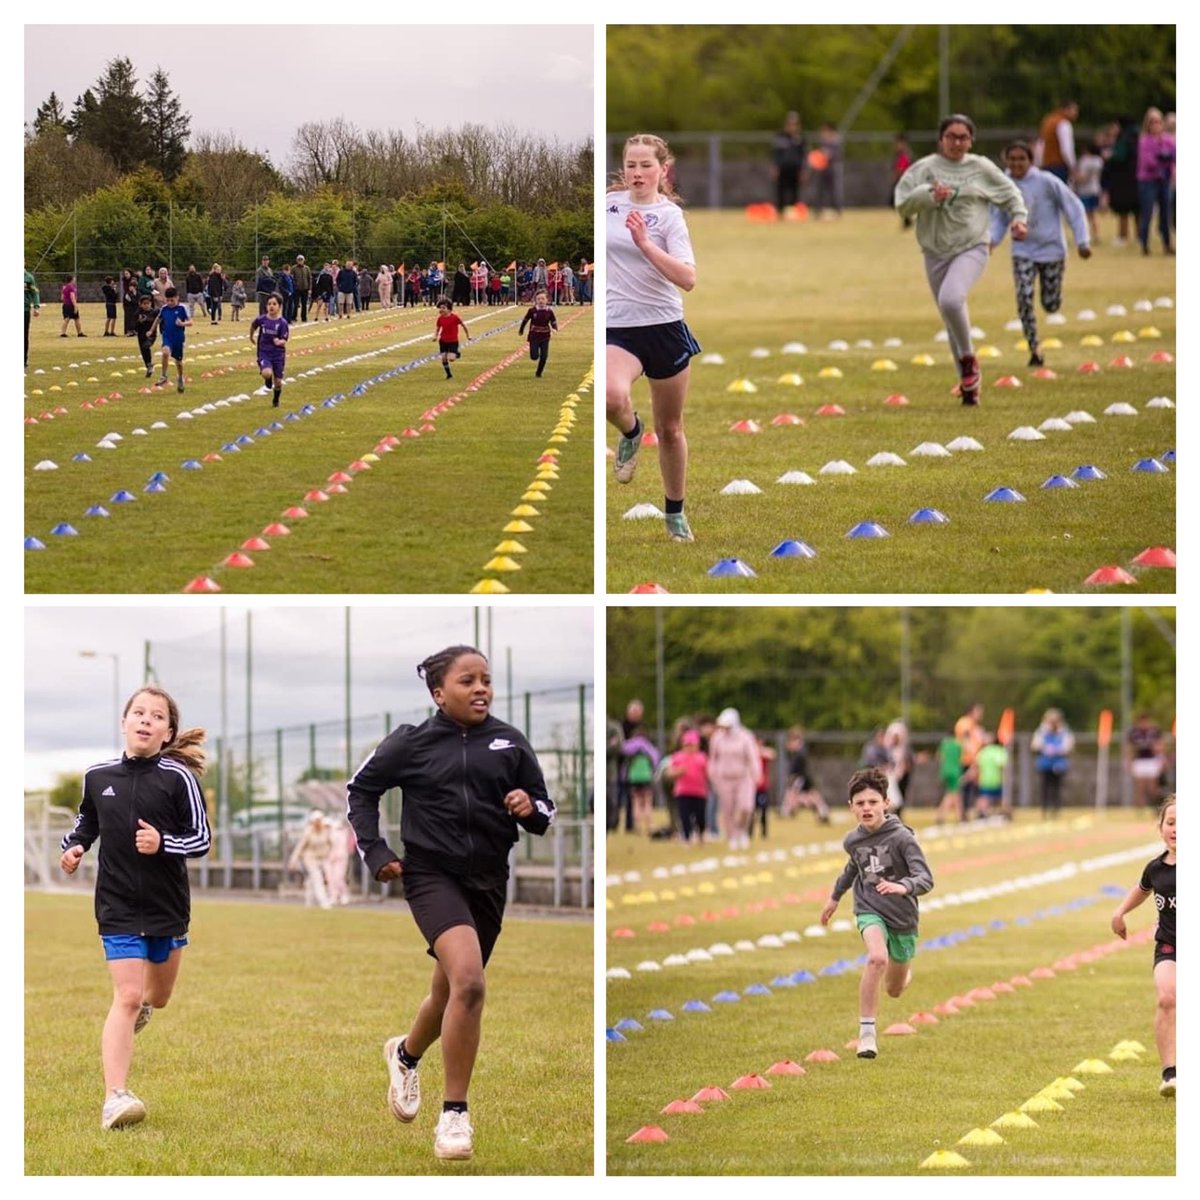 We kickstarted our active schools week yesterday by encouraging lots of our pupils to take part in the local community games. It was a great day. @ActiveFlag @BealachanDoirin #ASW